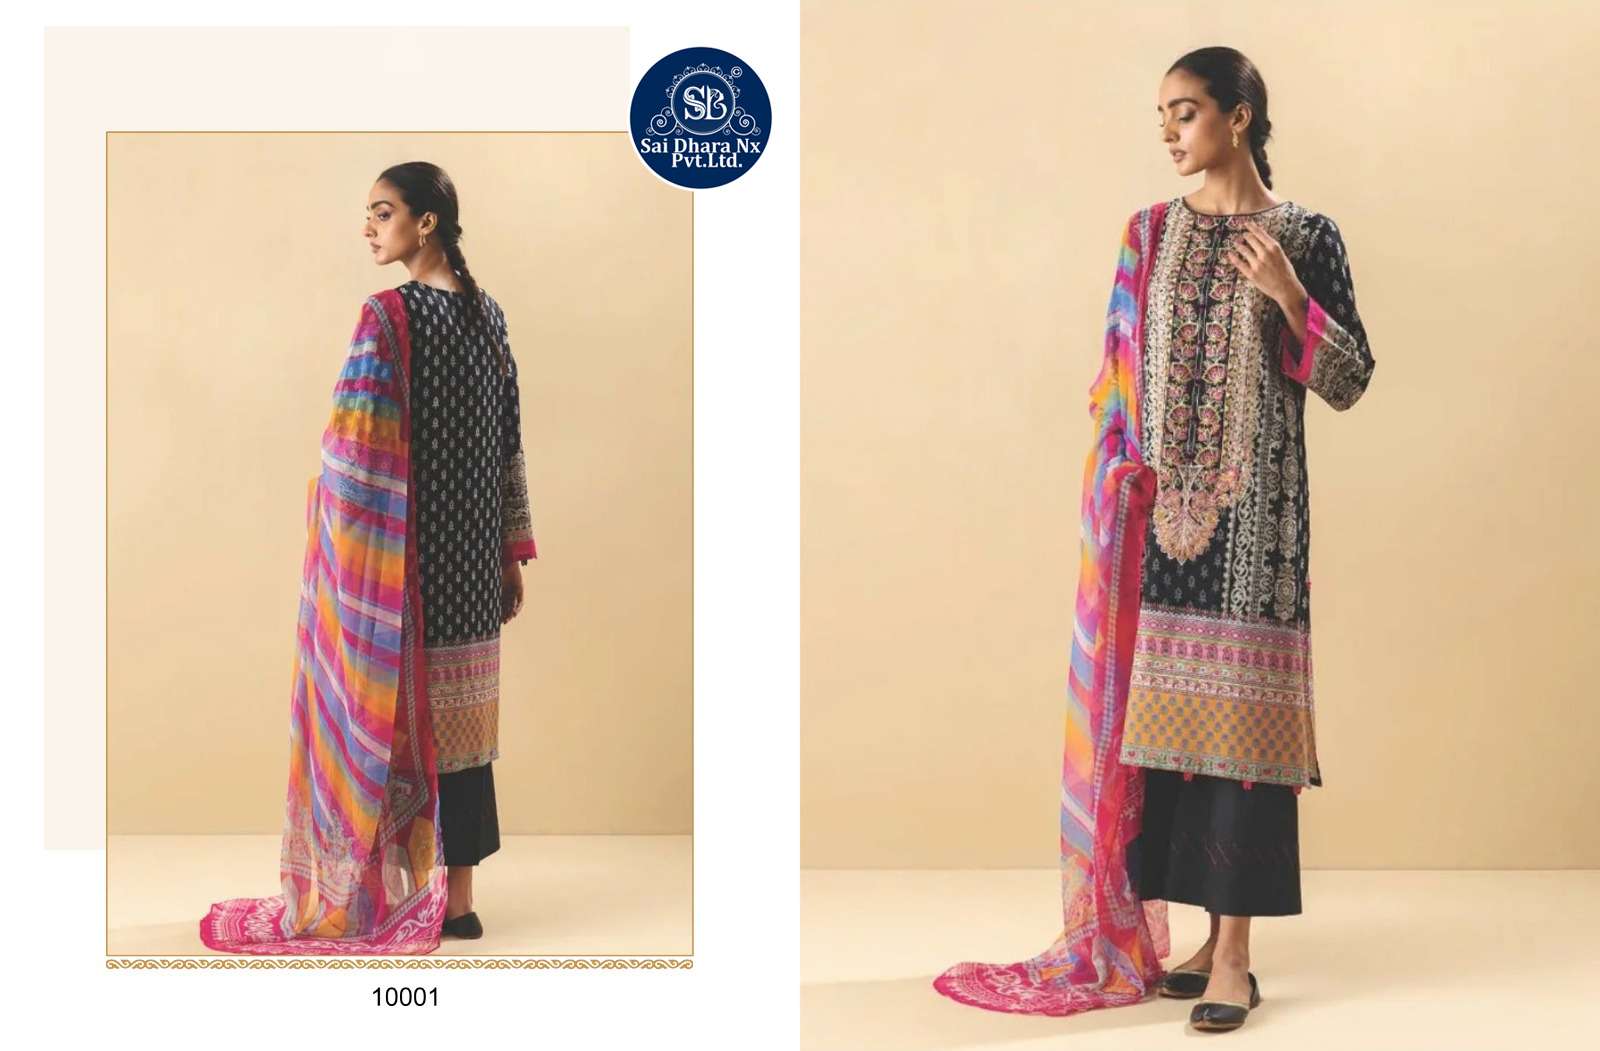 SHRADDHA DESIGNER PRESENTS FIRDOUS VOL-10 LAWN COTTON PRINTED WITH HEAVY EMBROIDERY PATCH PAKISTANI DRESS MATERIAL WHOLESALE SHOP IN SURAT - SaiDharaNx